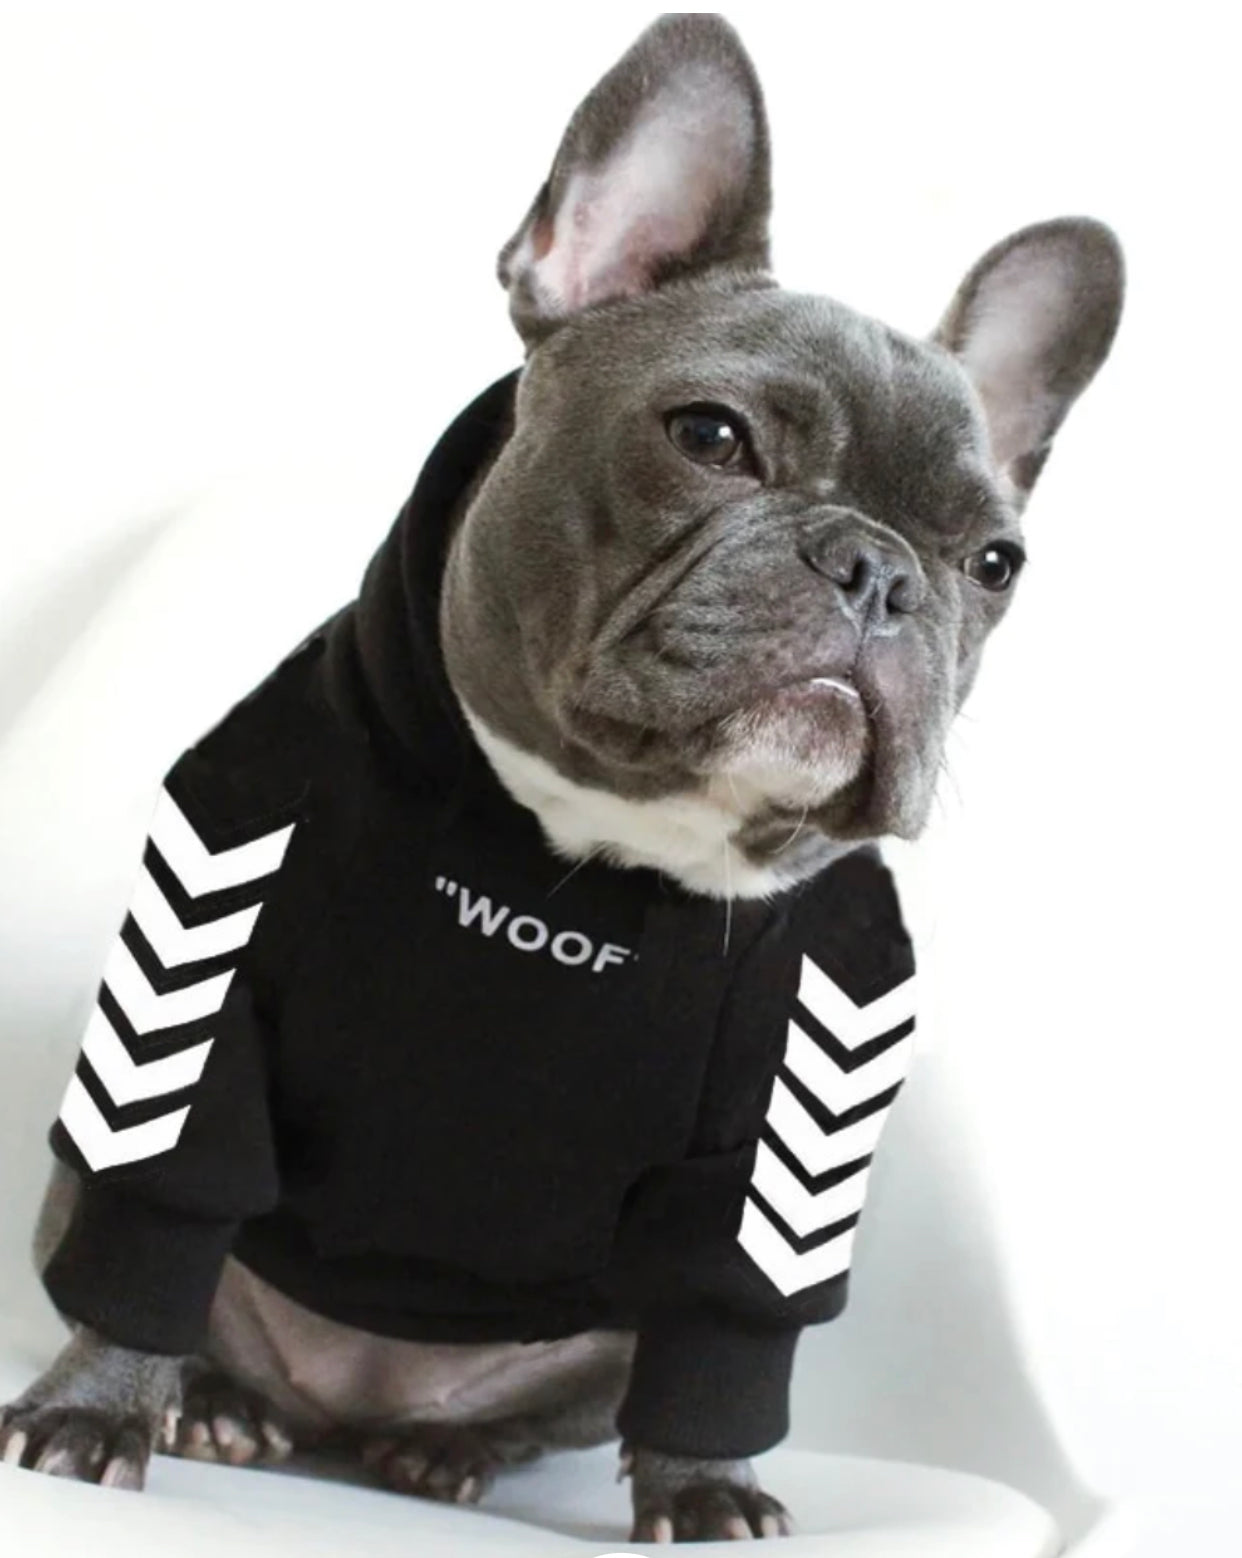 Black WOOF Super fashion hooded sweatshirt 100% cotton. Luxury chic clothing for dogs, cats and pets.